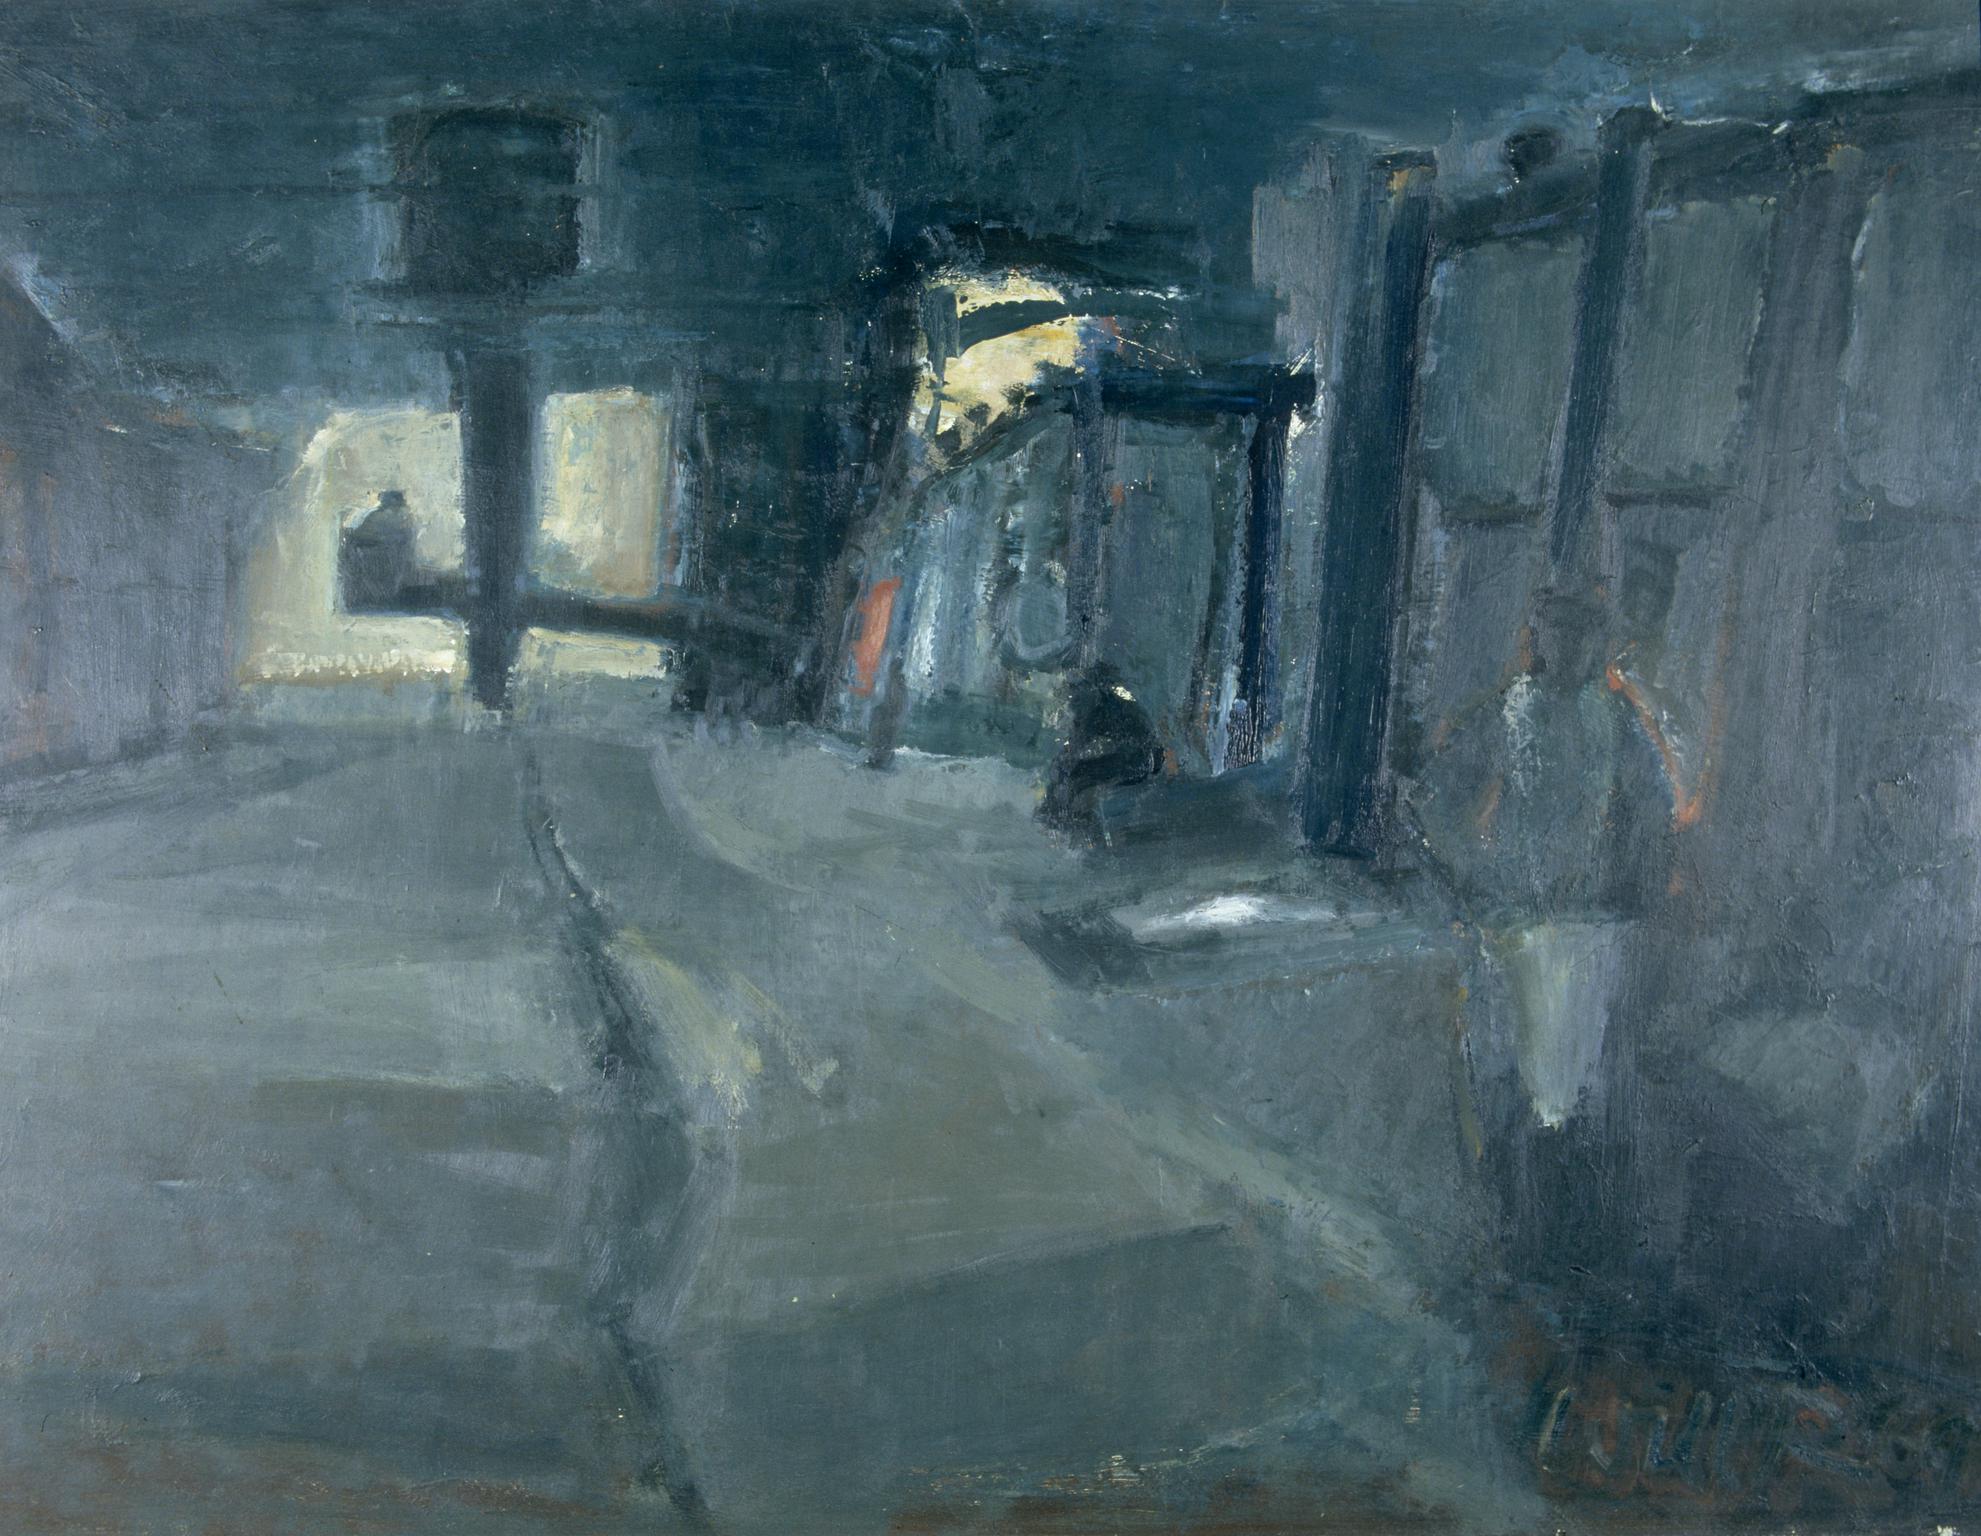 Open Hearth Furnaces, Gorseinon Steel Works (painting)